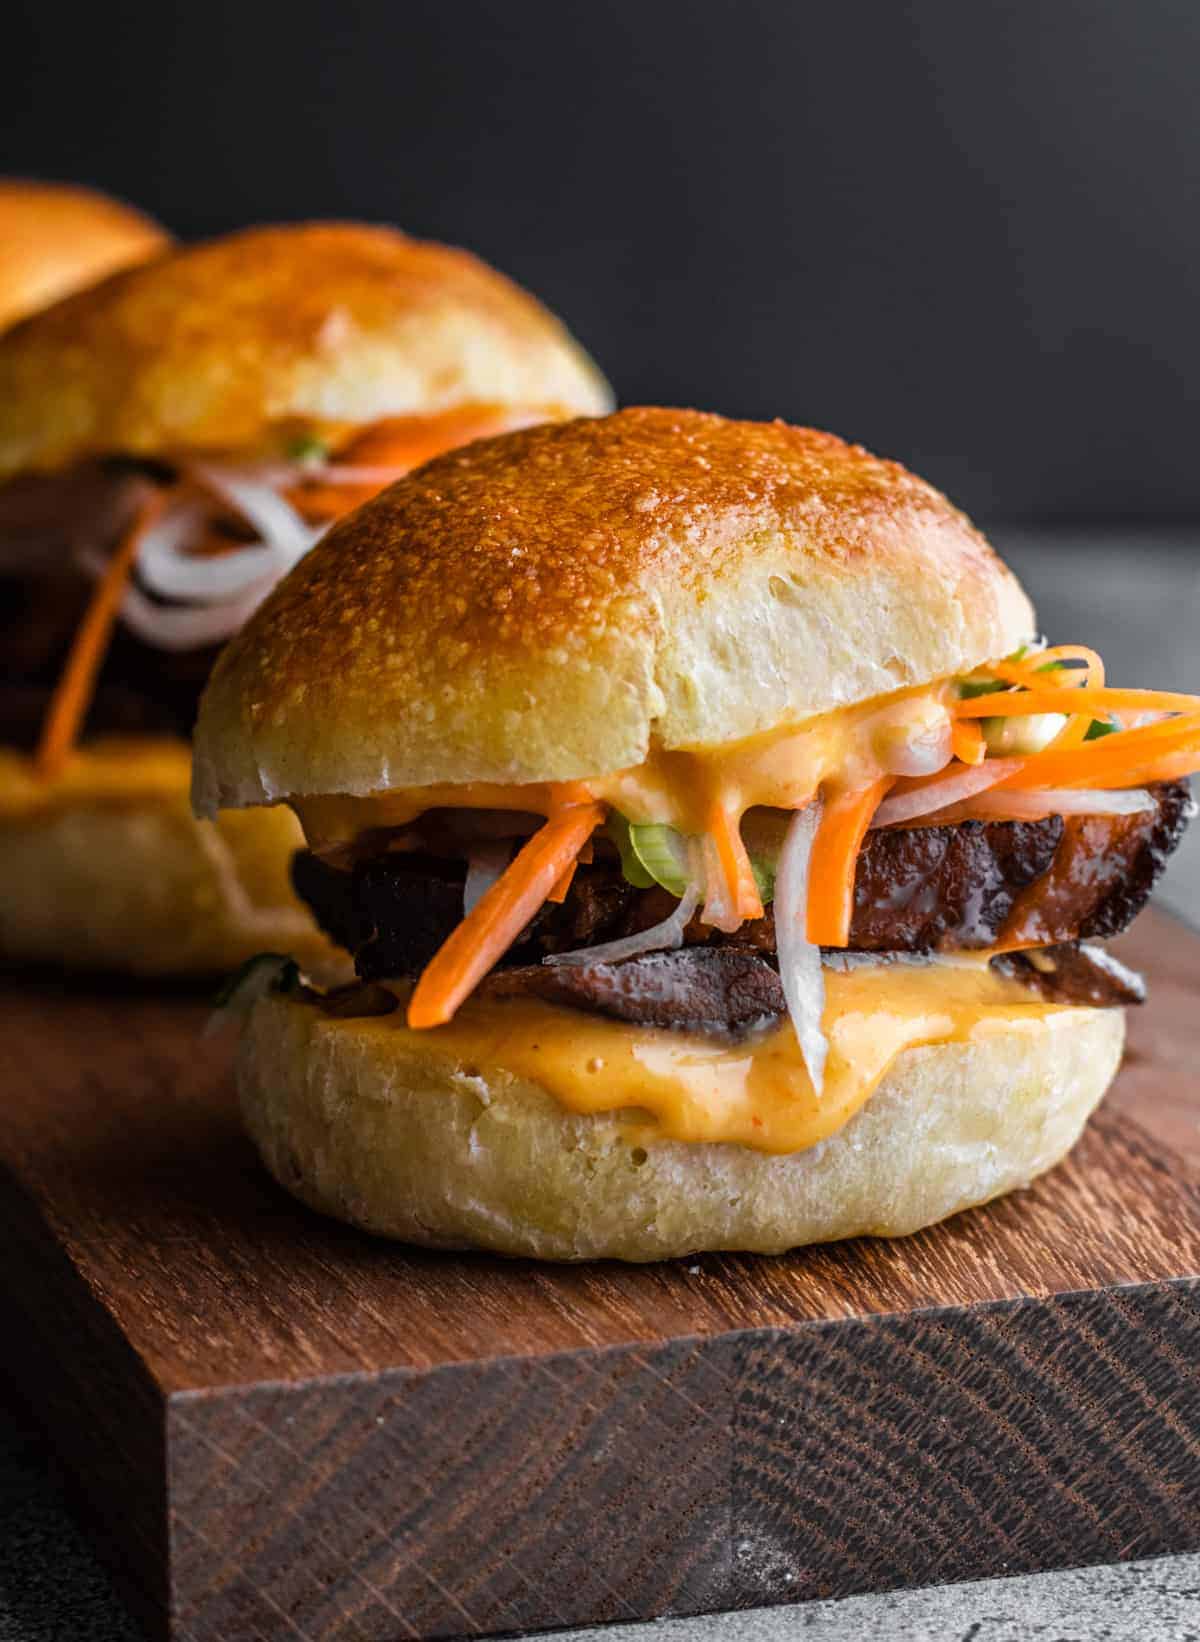 Asian pork sliders on a wooden cutting board, perfect for those searching for delicious pork belly recipes.